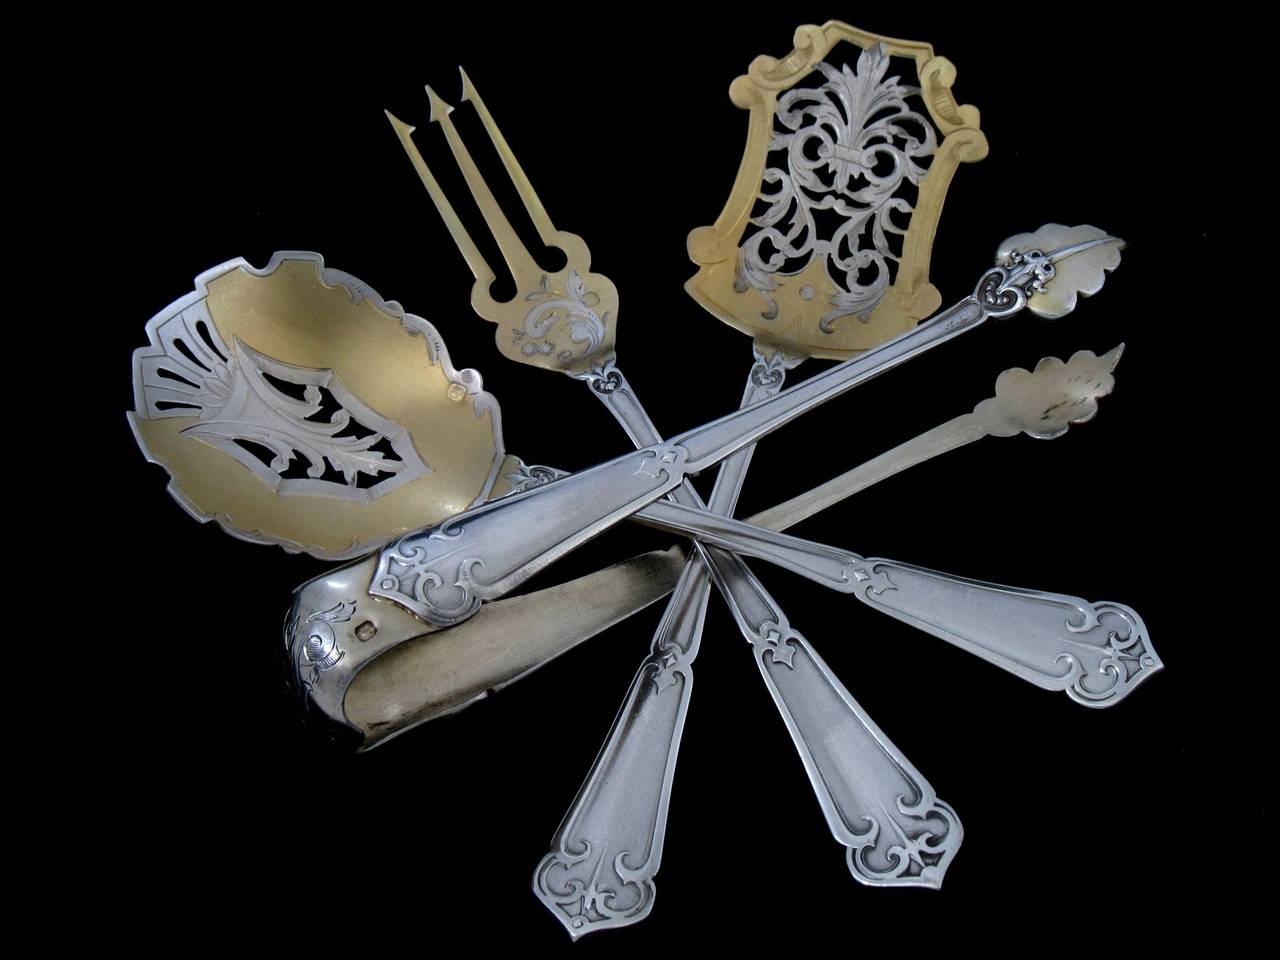 Soufflot French All Sterling Silver Dessert Hors D'oeuvre Set 4 pc w/box Ferrure 4